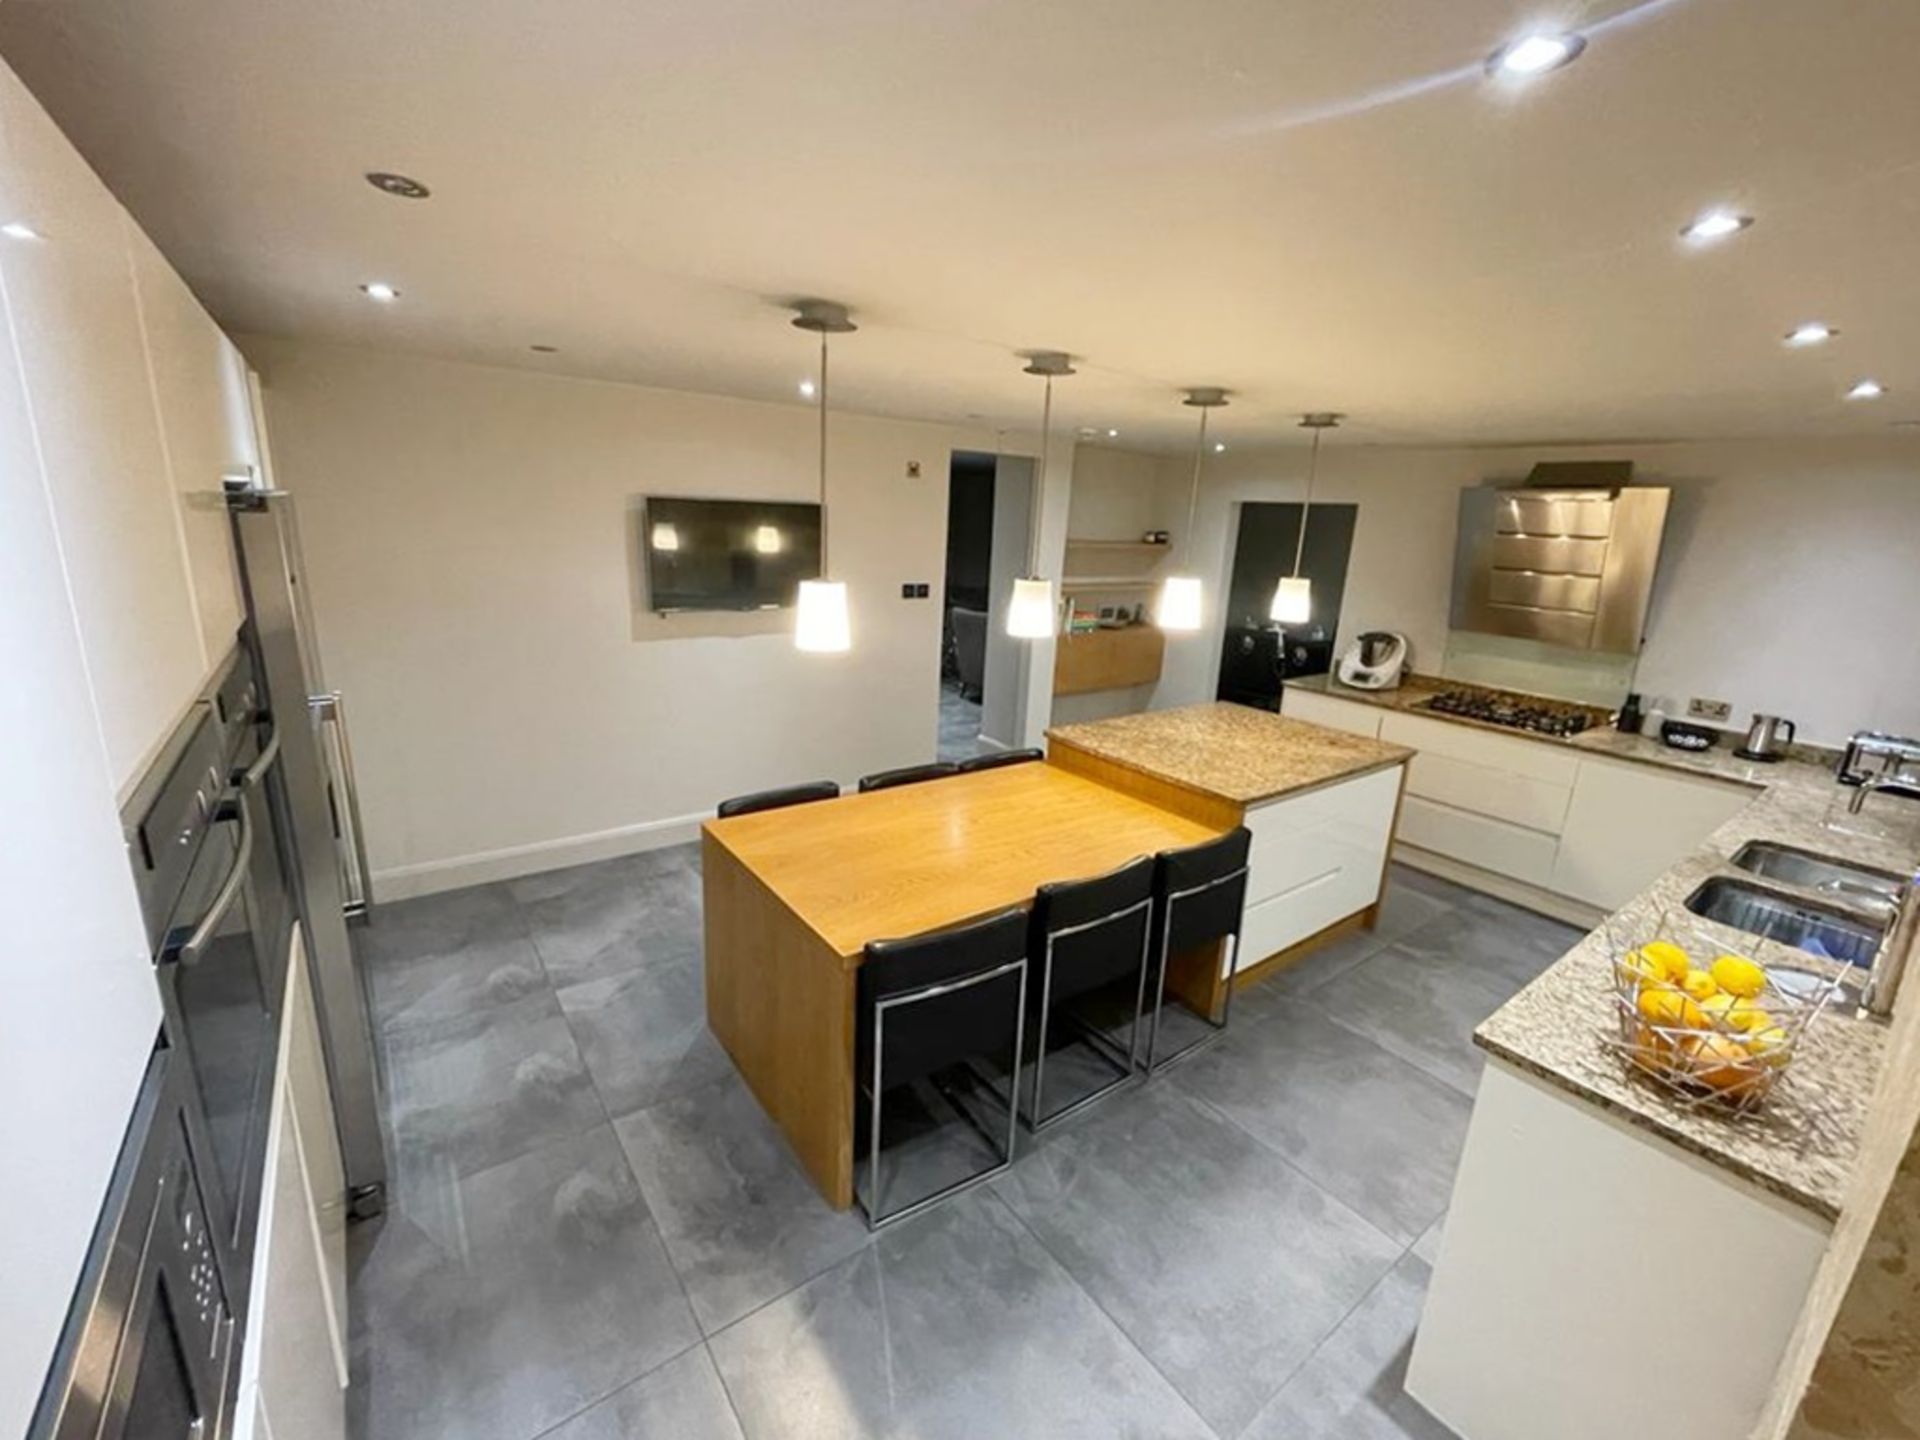 1 x Stunning PARAPAN Handleless Fitted Kitchen with Neff Appliances, Granite Worktops & Island - Image 88 of 126